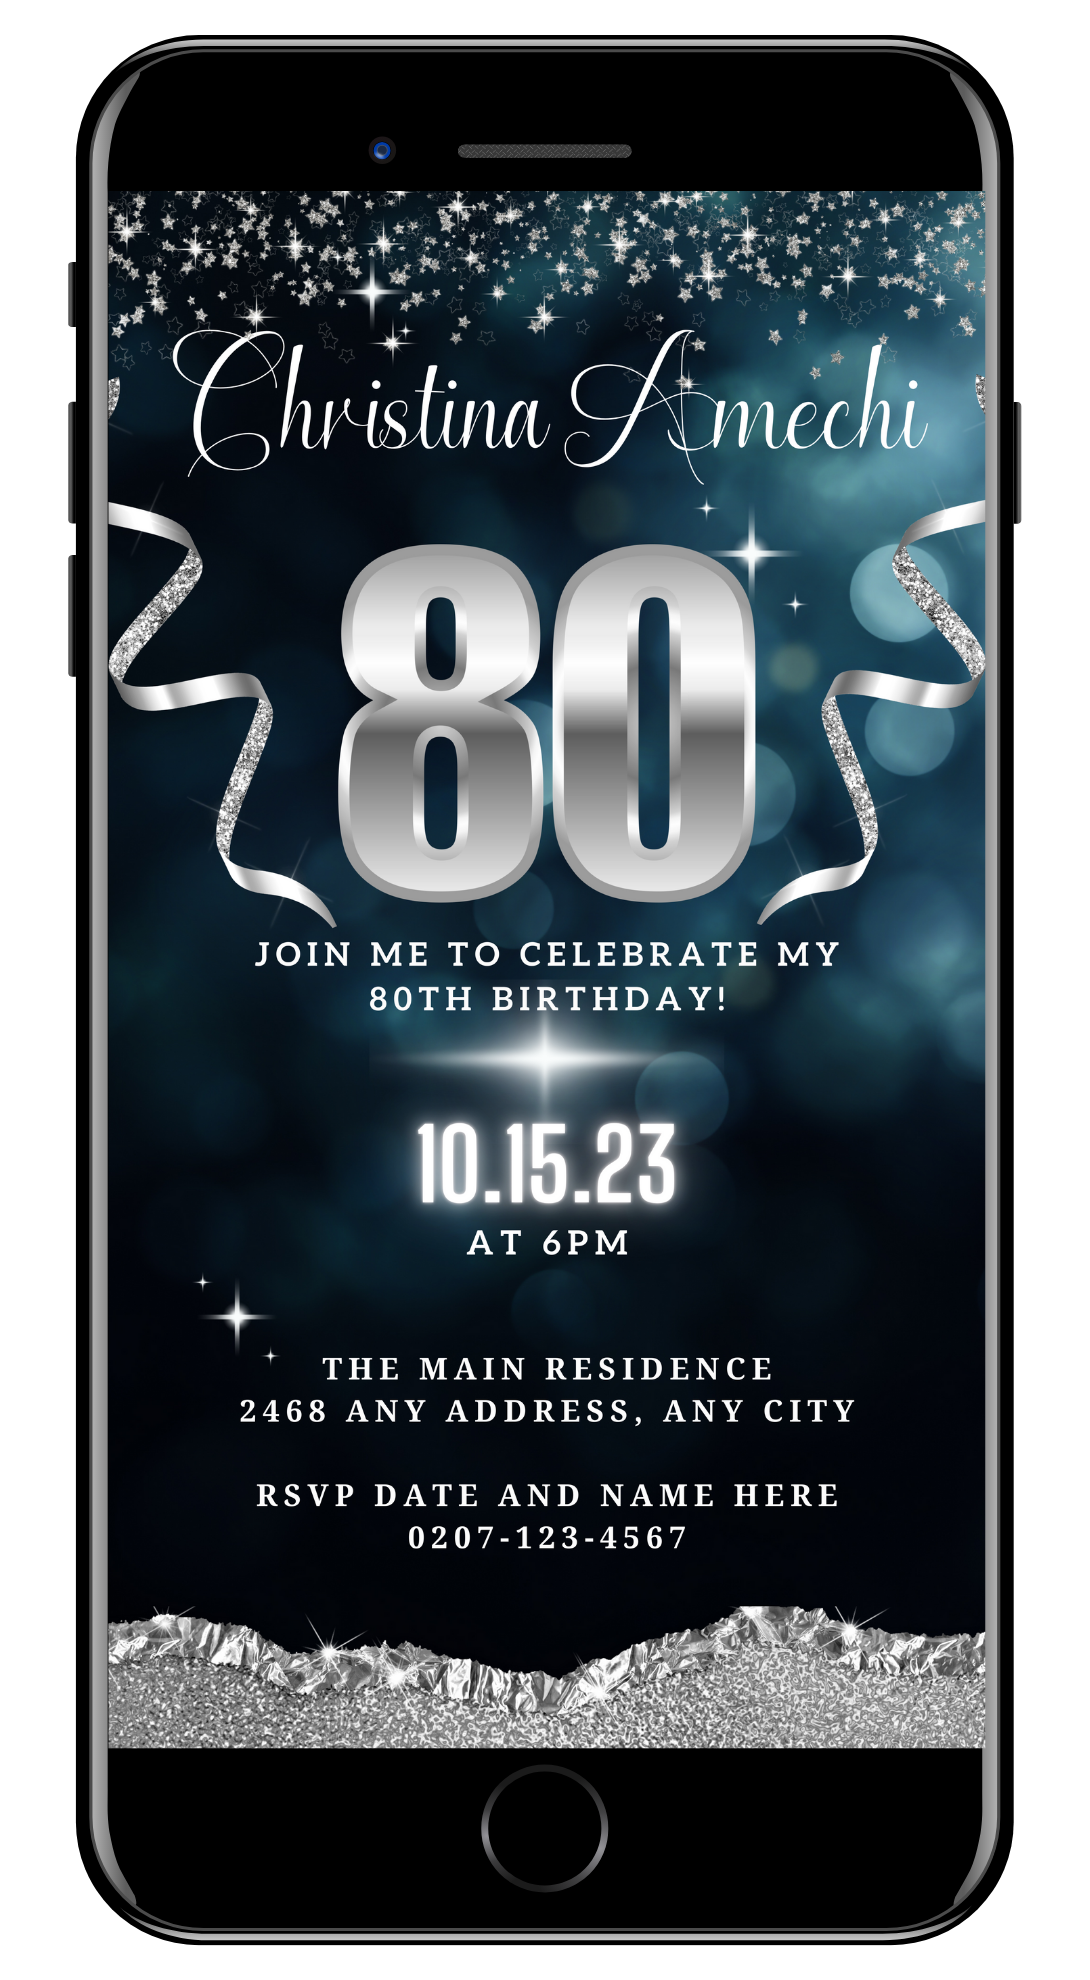 Customizable Navy Blue Silver Glitter 80th Birthday Evite, displayed on a smartphone screen, featuring editable text and design elements for easy personalization using Canva.